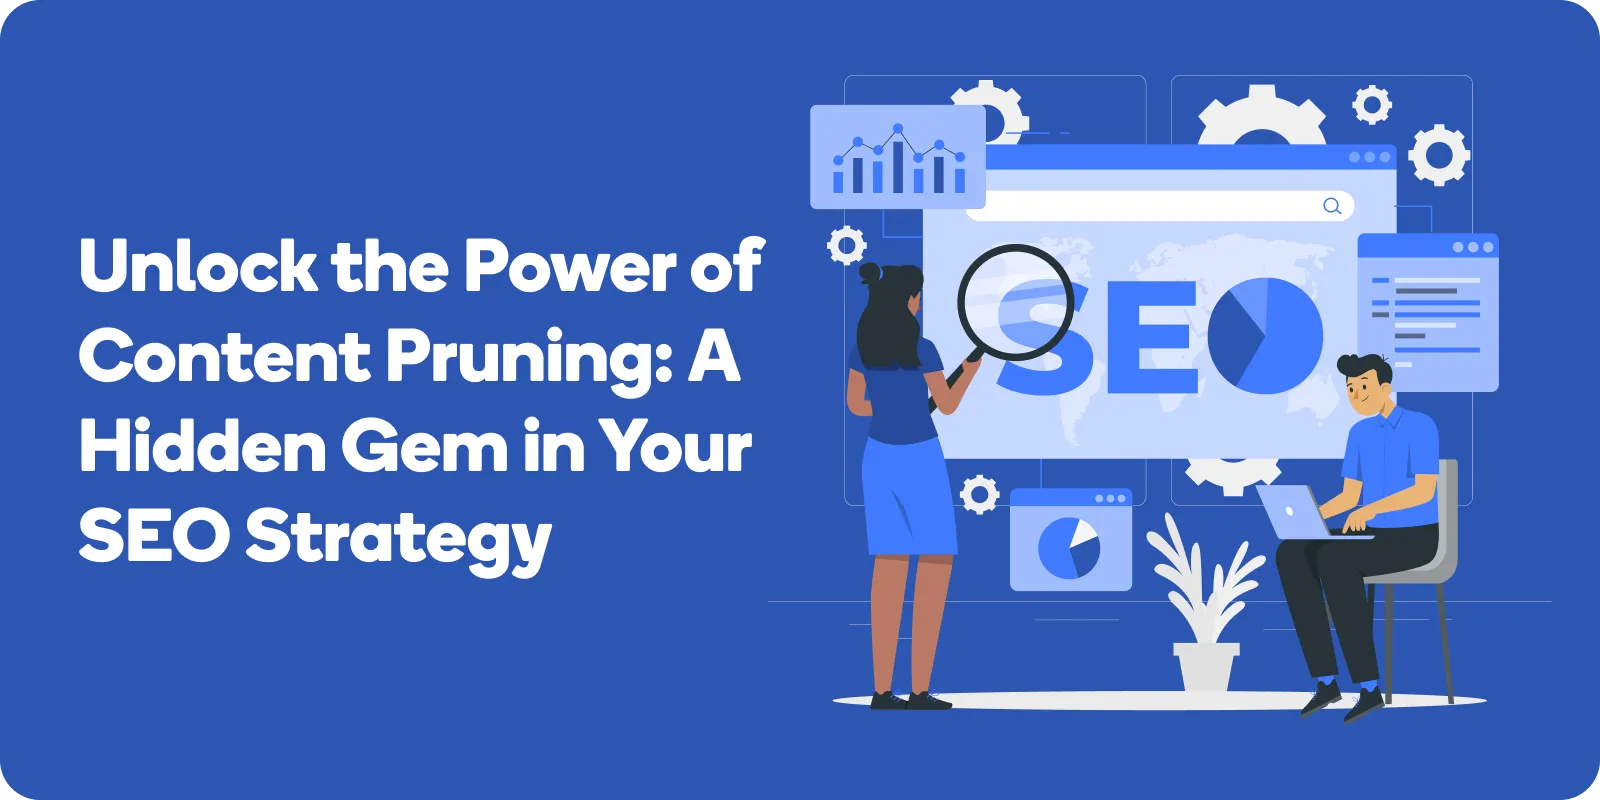 Unlock-the-Power-of-Content-Pruning-A-Hidden-Gem-in-Your-SEO-Strategy